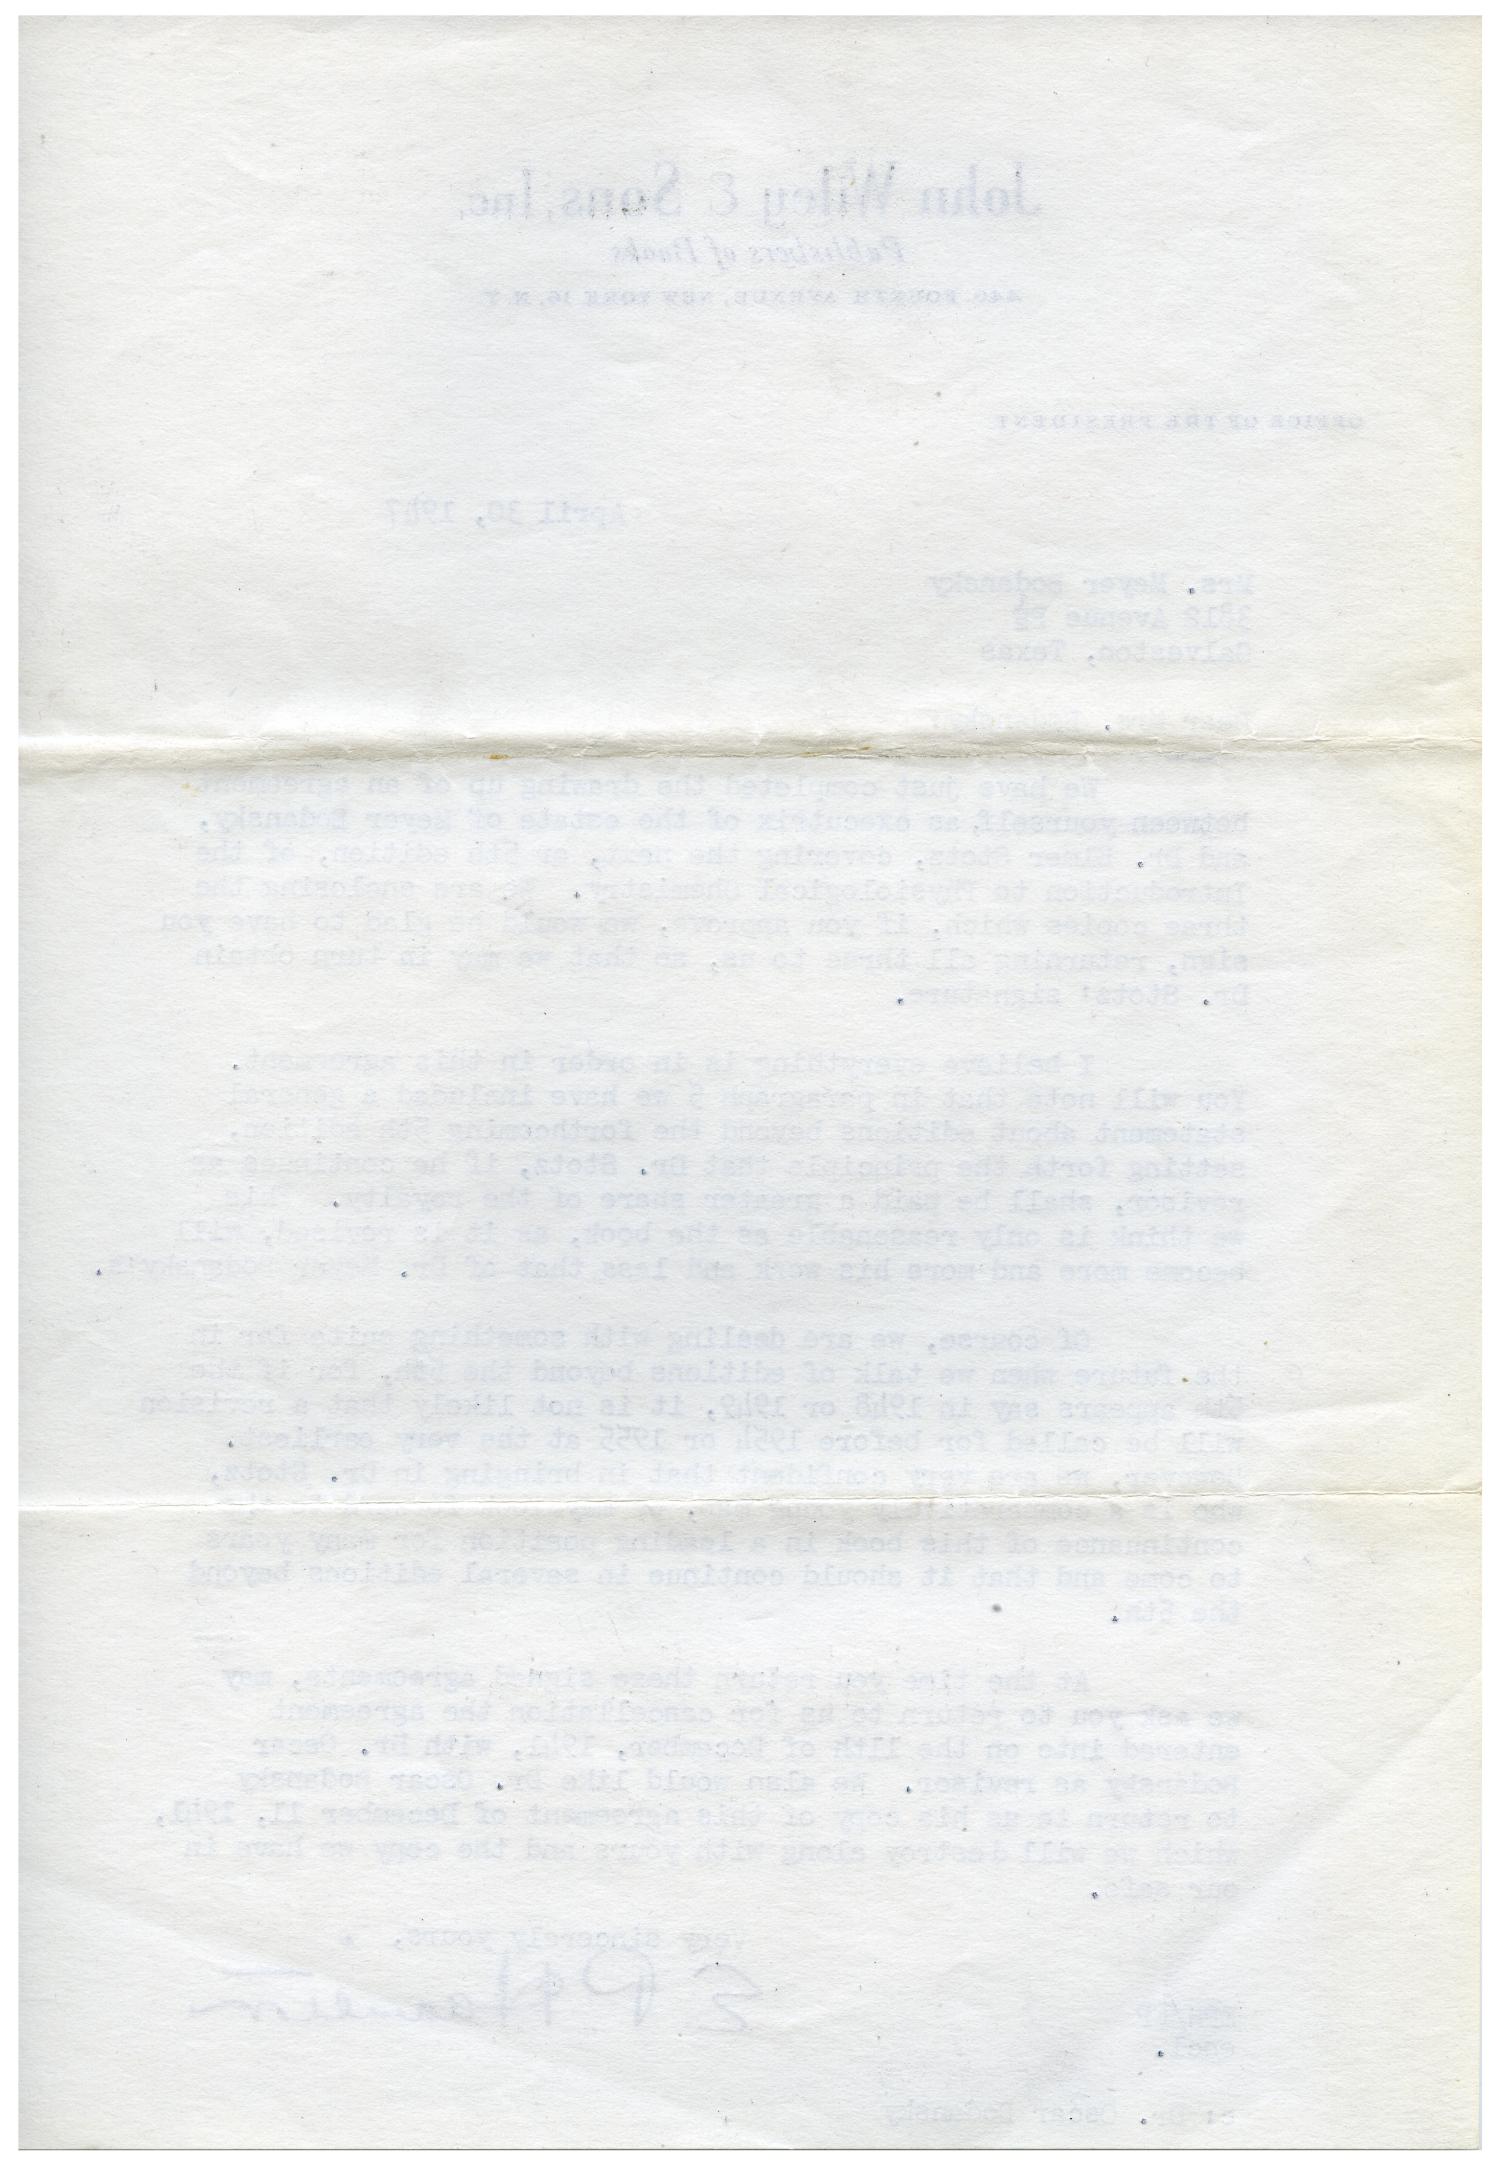 [Letter from E. P. Hamilton to Eleanor Bodansky - April 30, 1947]
                                                
                                                    [Sequence #]: 2 of 2
                                                